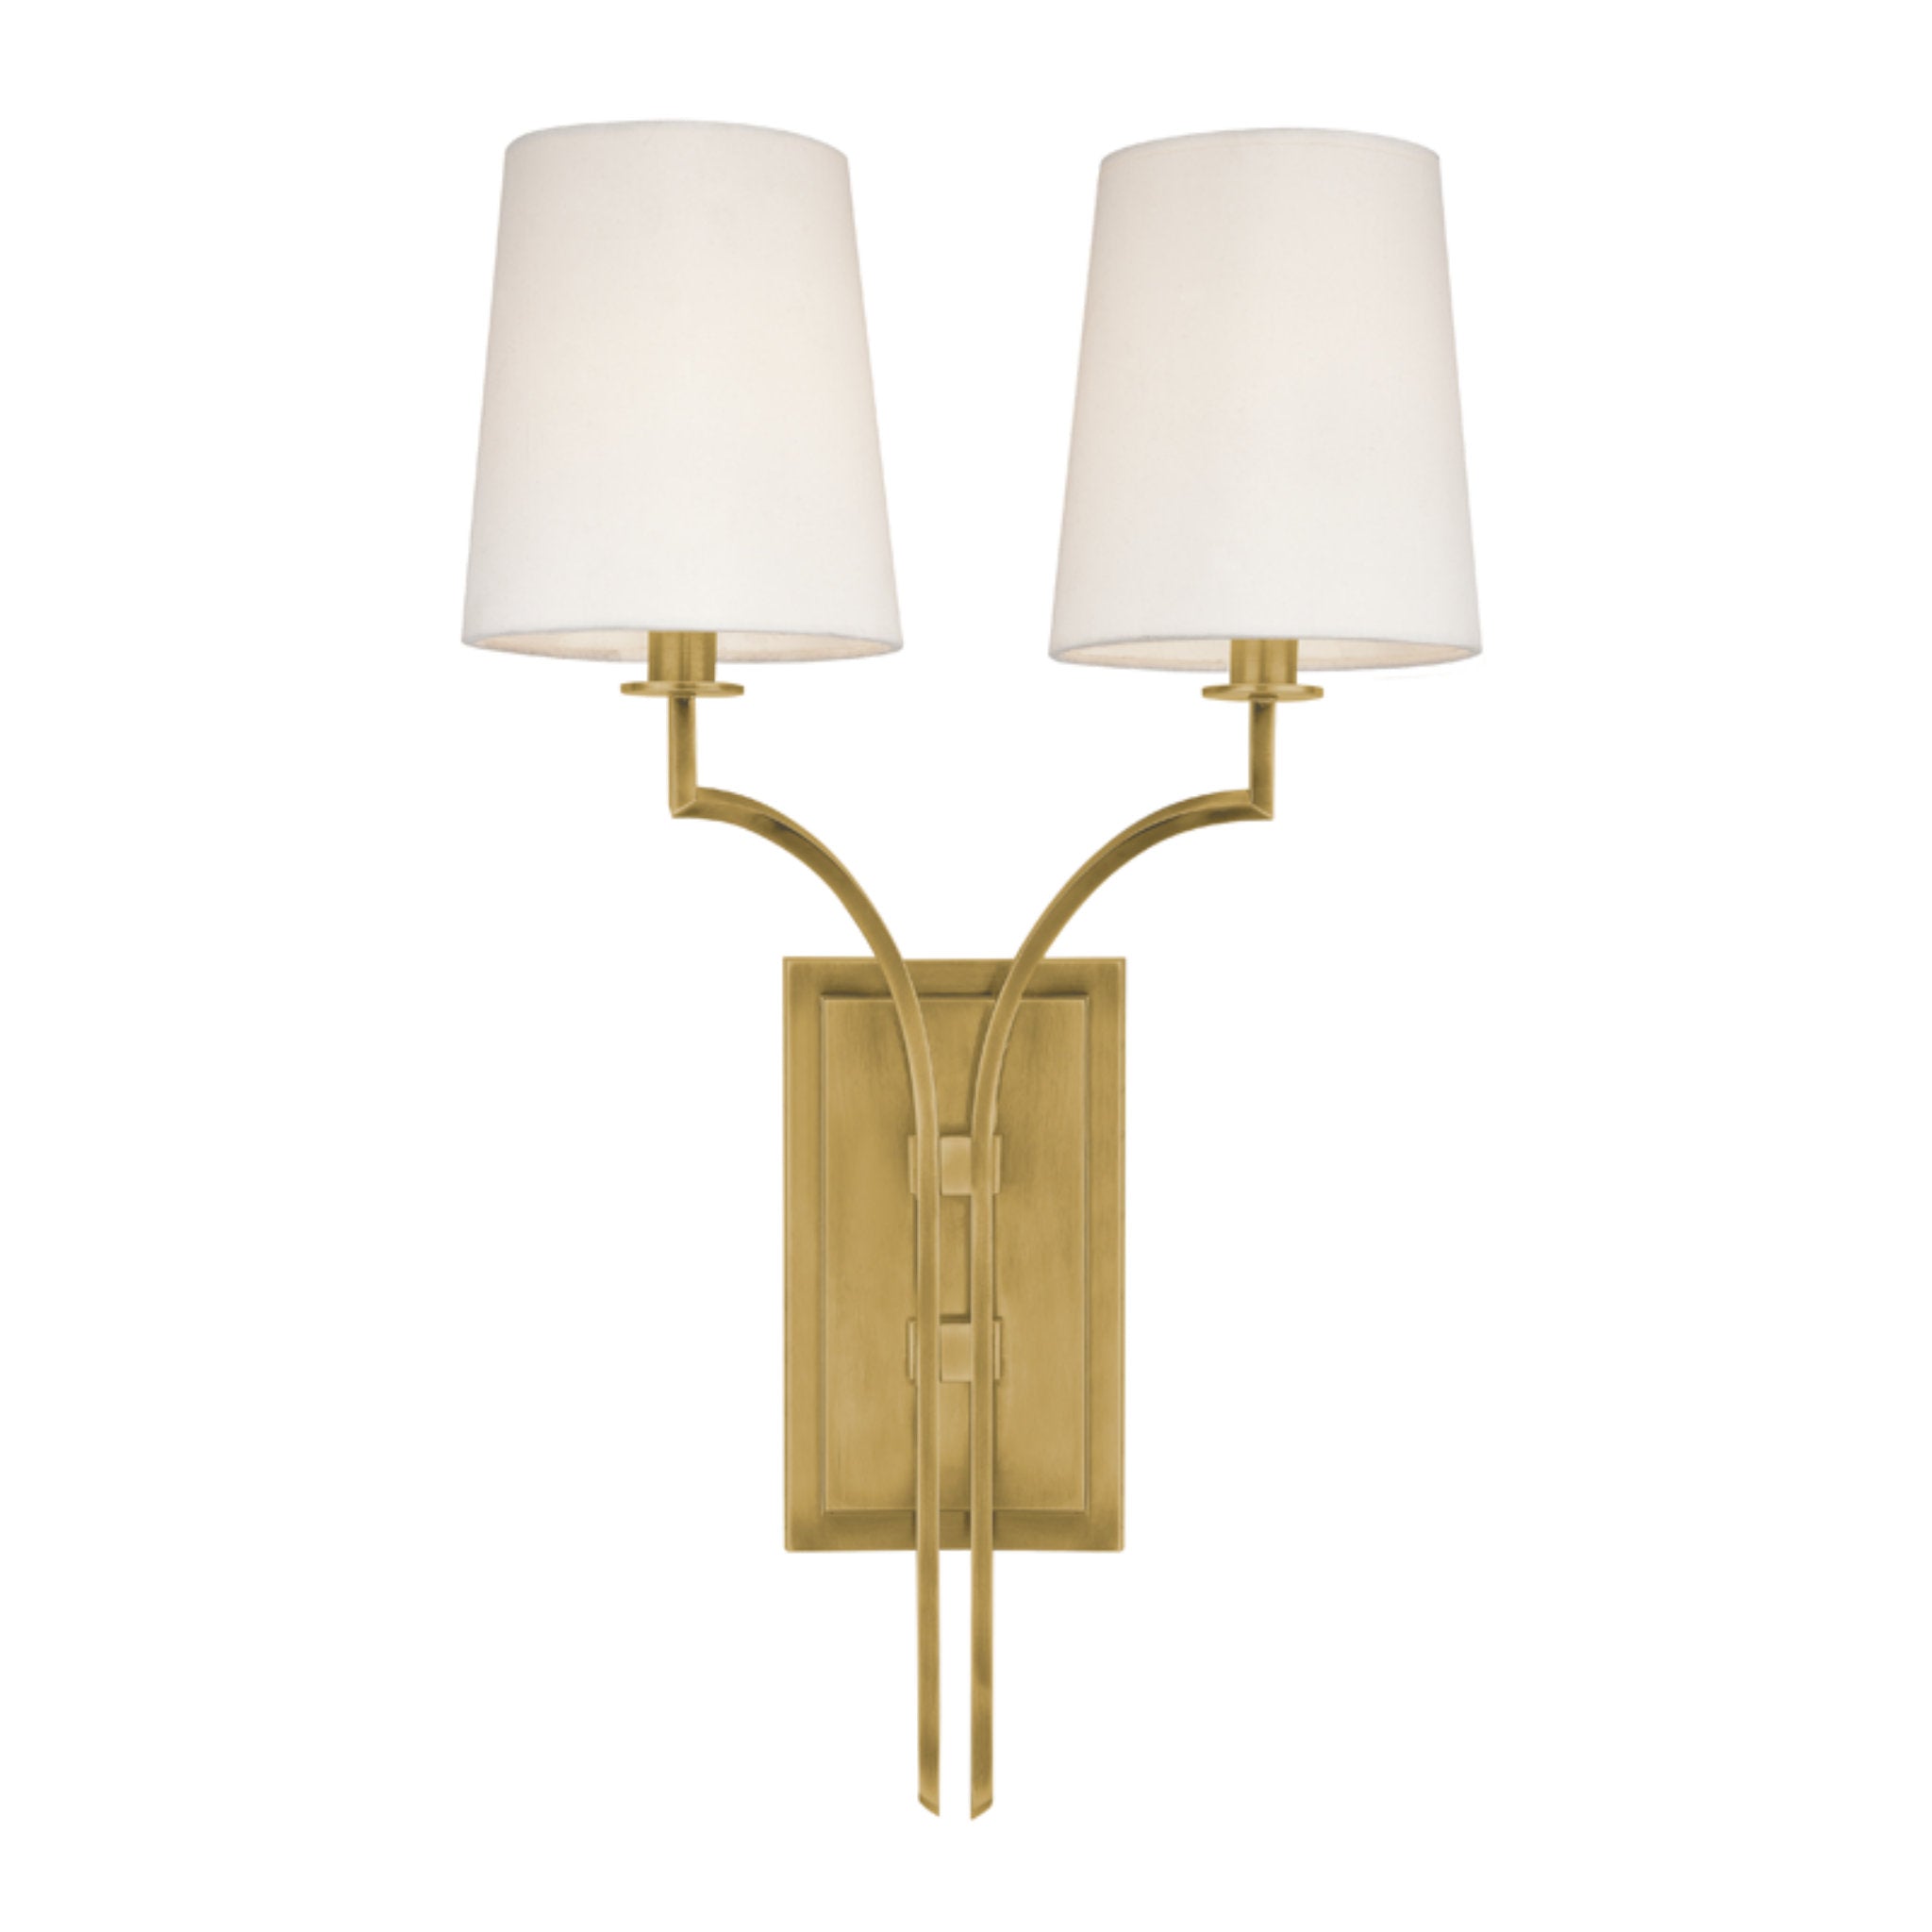 Glenford 2 Light Wall Sconce in Aged Brass